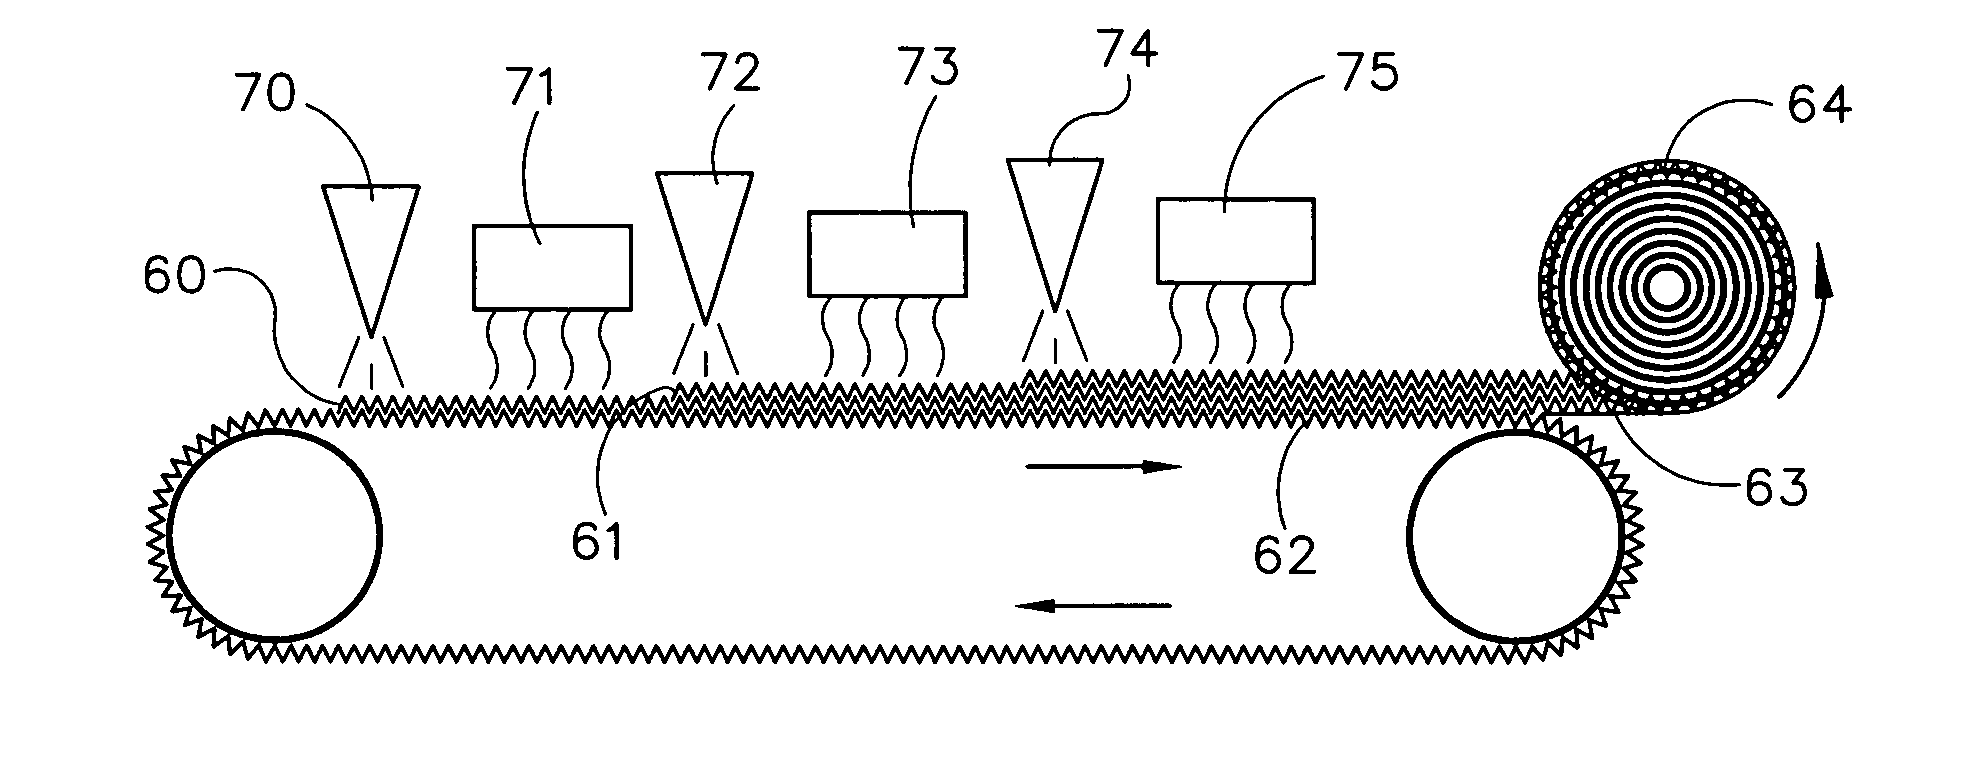 Process and apparatus for fabricating precise microstructures and polymeric molds for making same